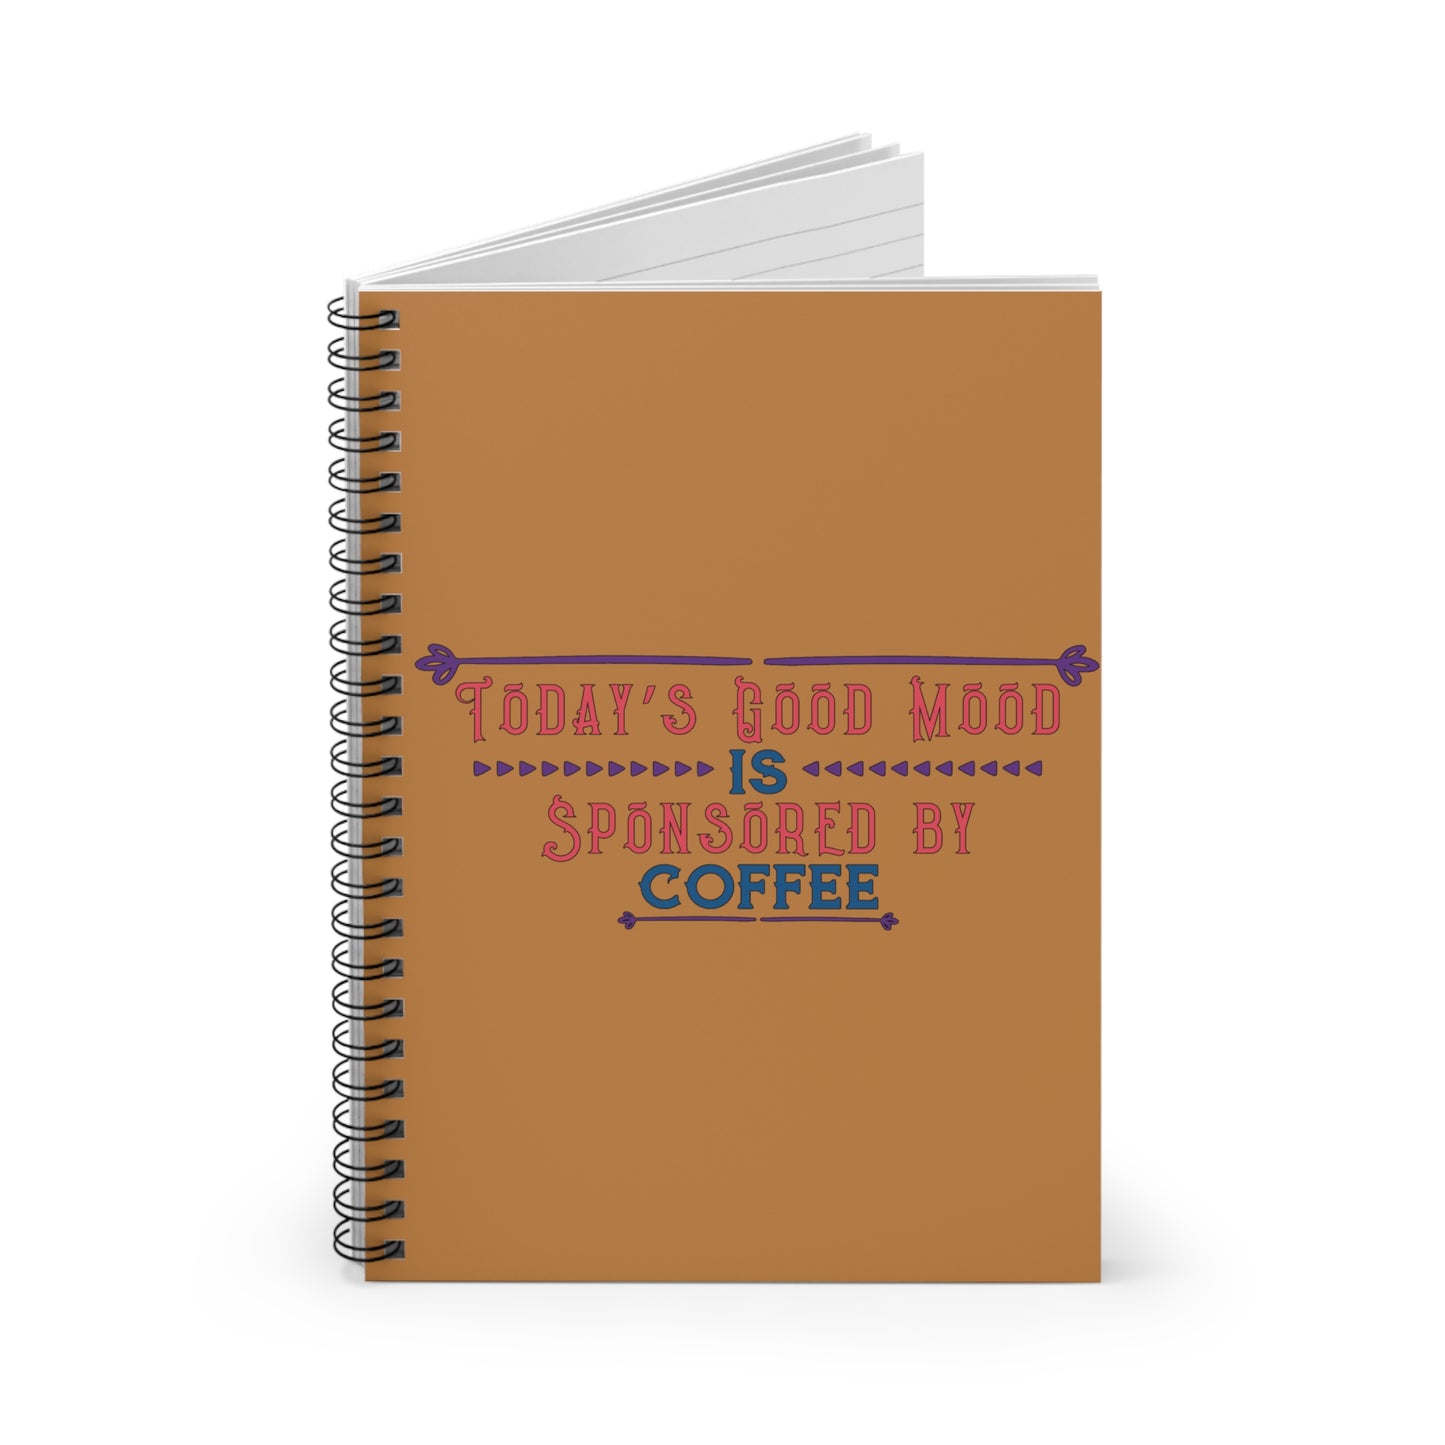 Today's Good Mood: Spiral Notebook - Log Books - Journals - Diaries - and More Custom Printed by TheGlassyLass.com